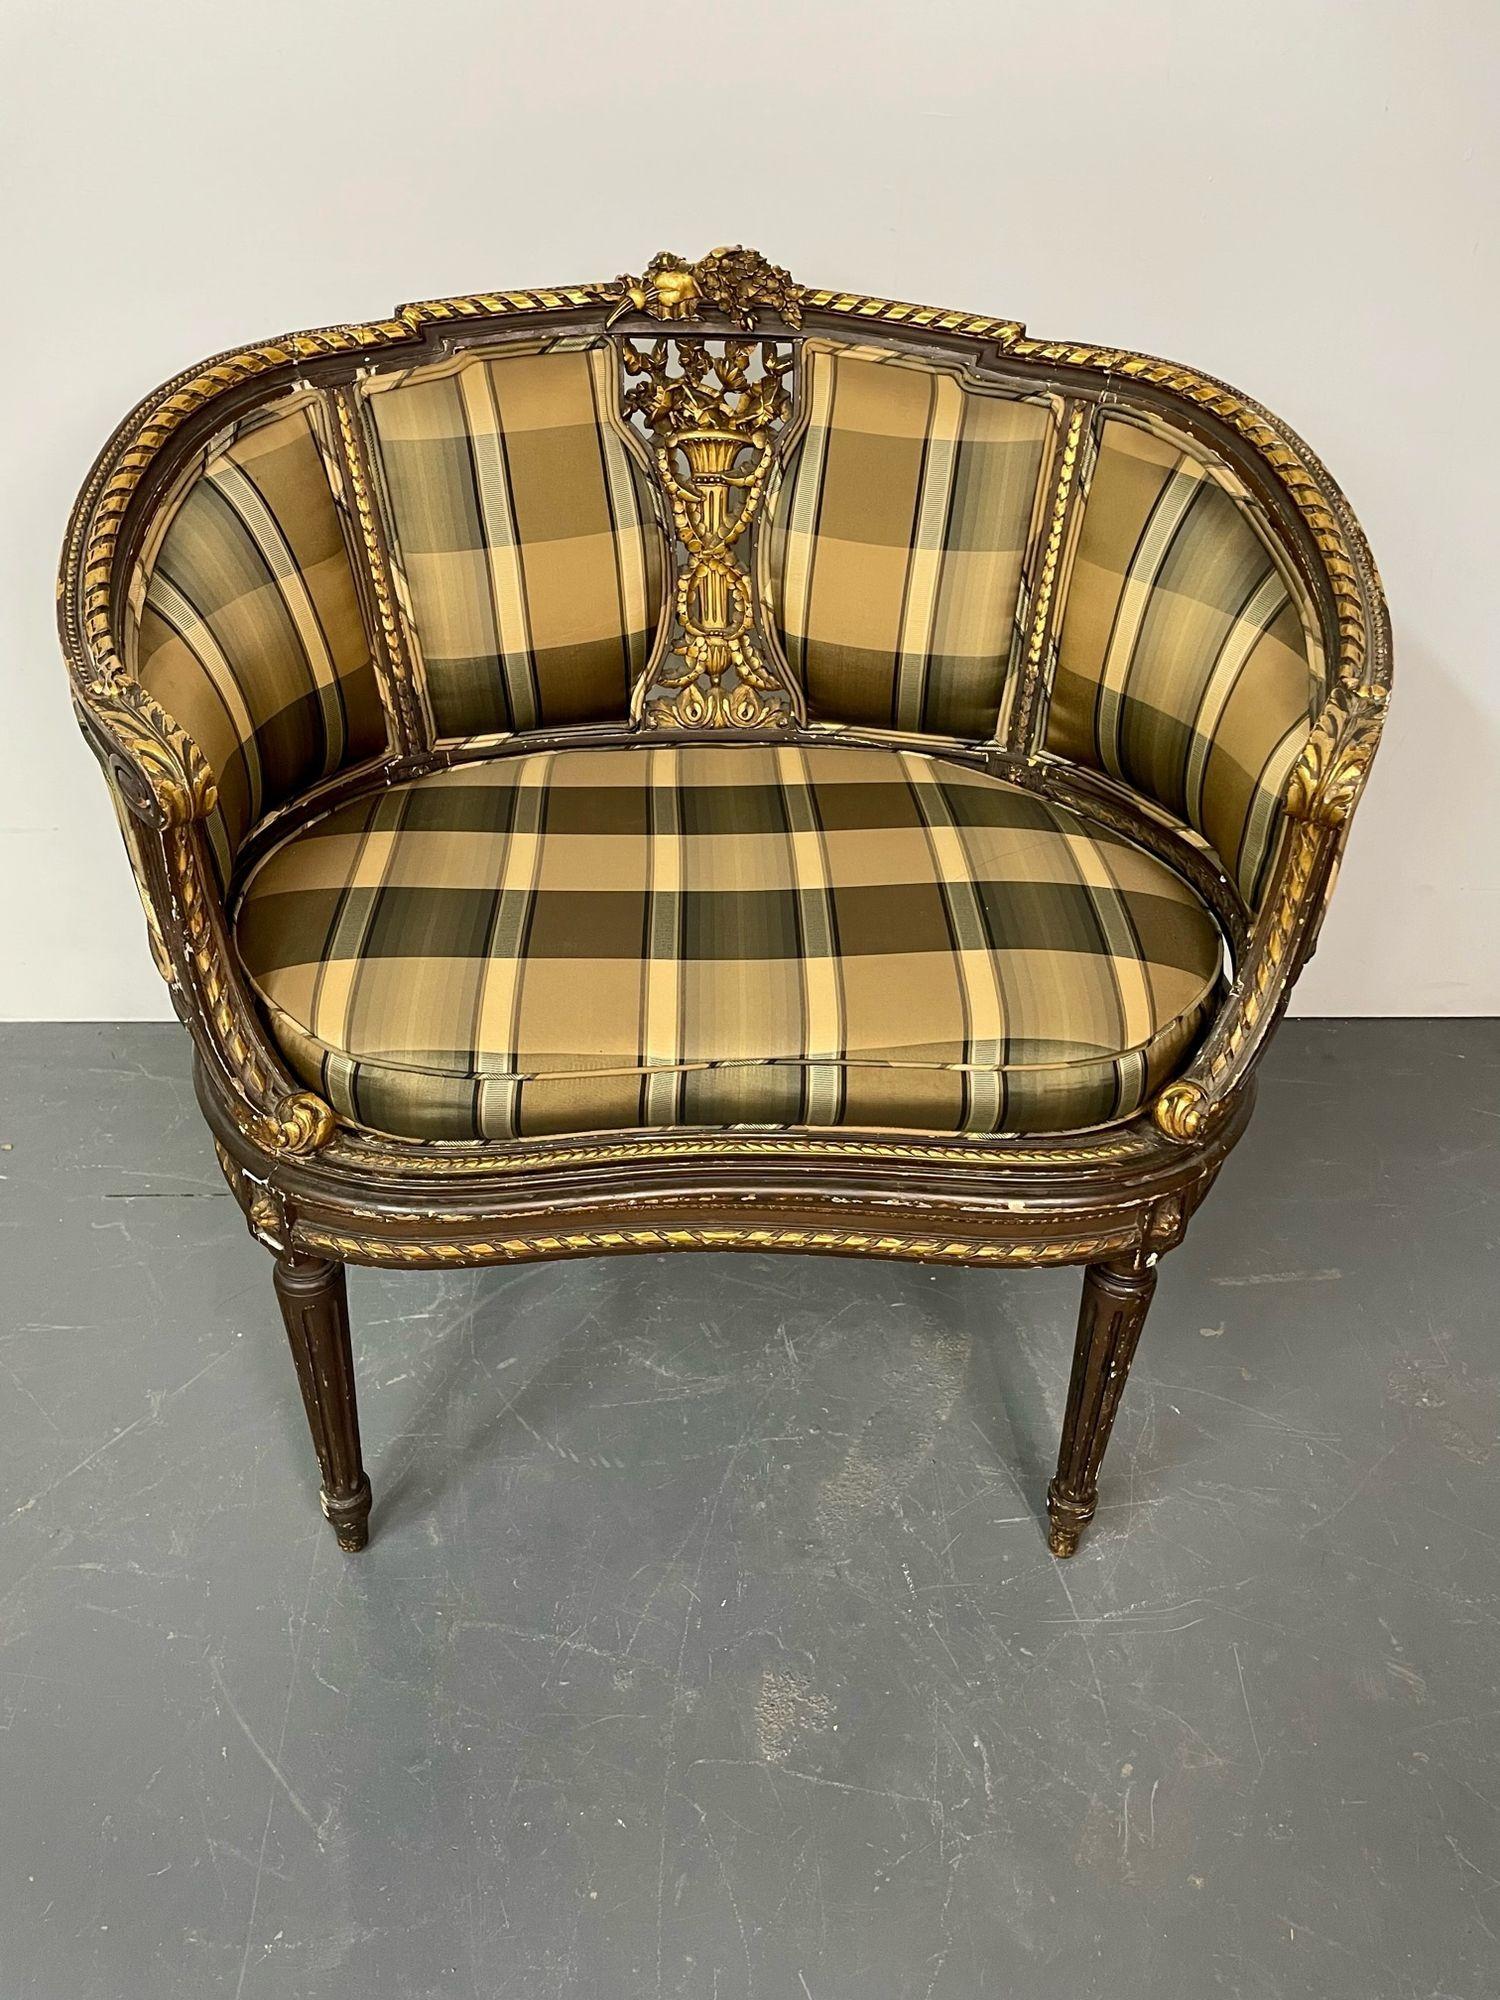 Louis XVI large chair signed Guillaume Grohe
Guillaume Grohe Fine Grohe signed chair in the style of Louis XVI. The frame finely carved with gilt gold highlights. The chair measures. - 33 high by 32 l by 21 D, late 19th early 20th century price of